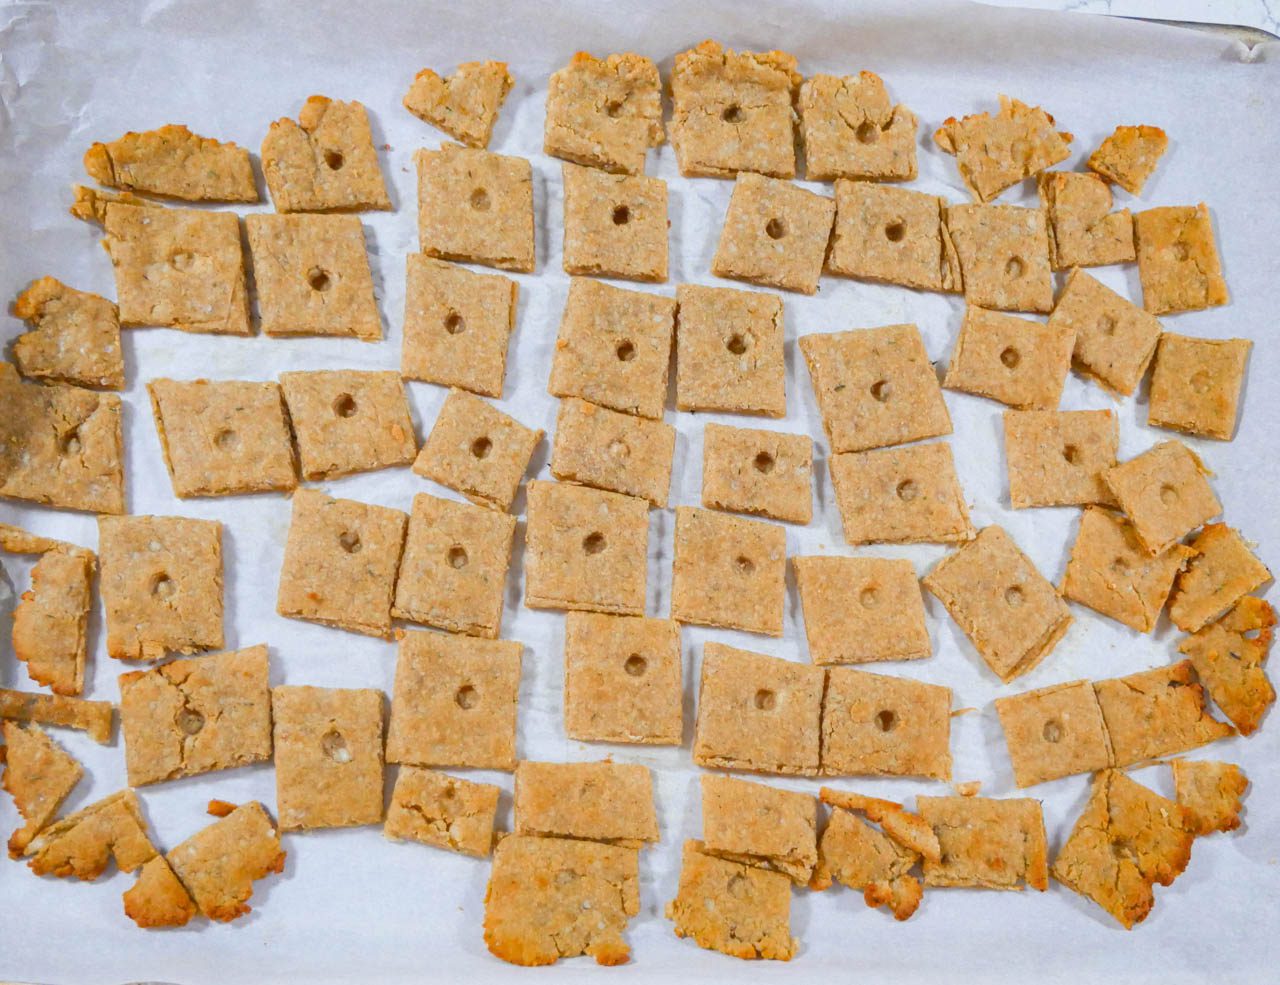 Tiger nut manchego crackers formed and baked